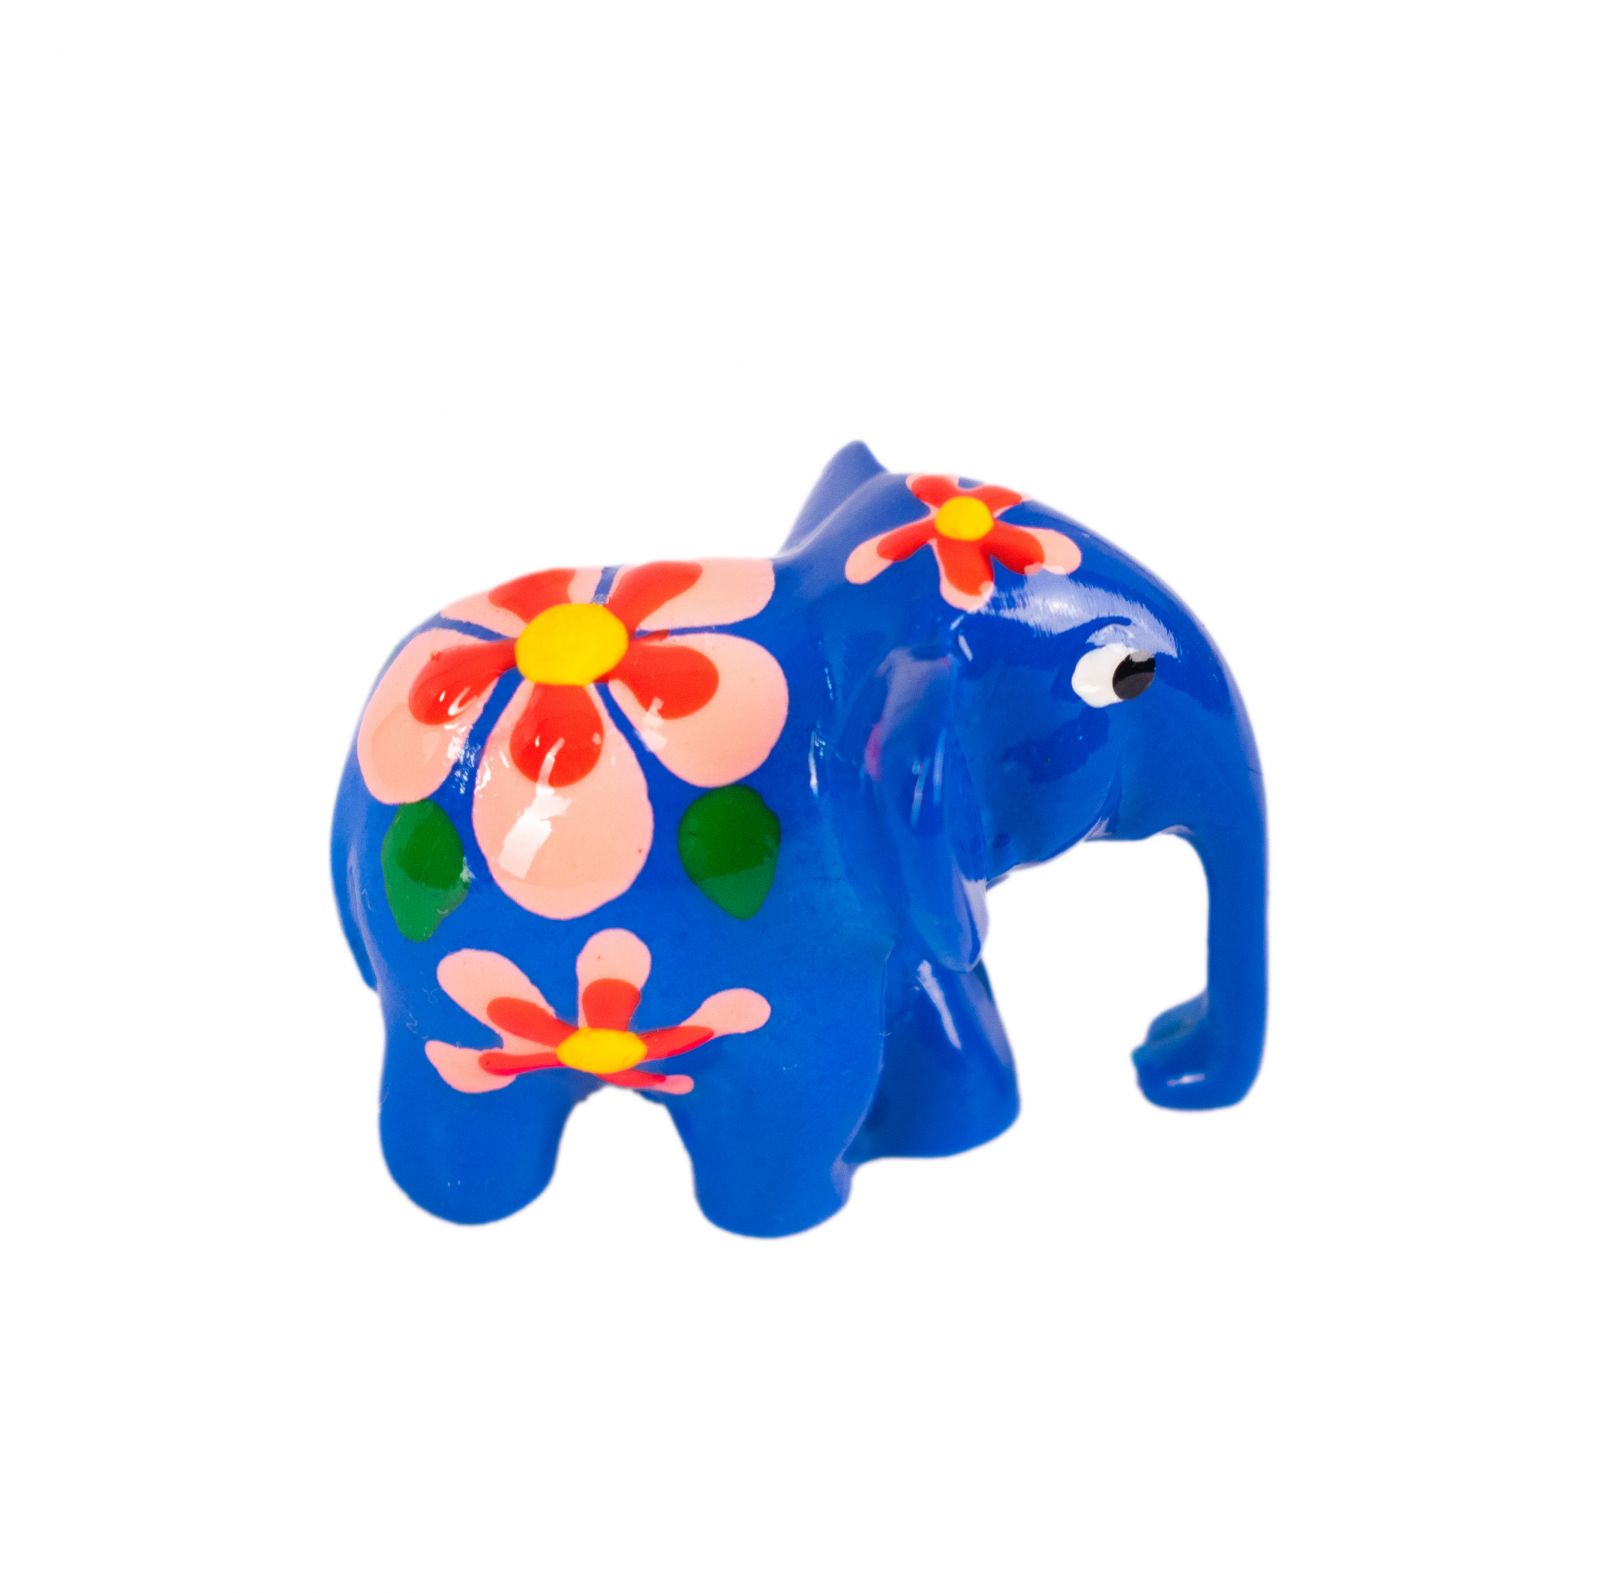 Hand-painted elephant statuette Bawah Dilukis Thailand